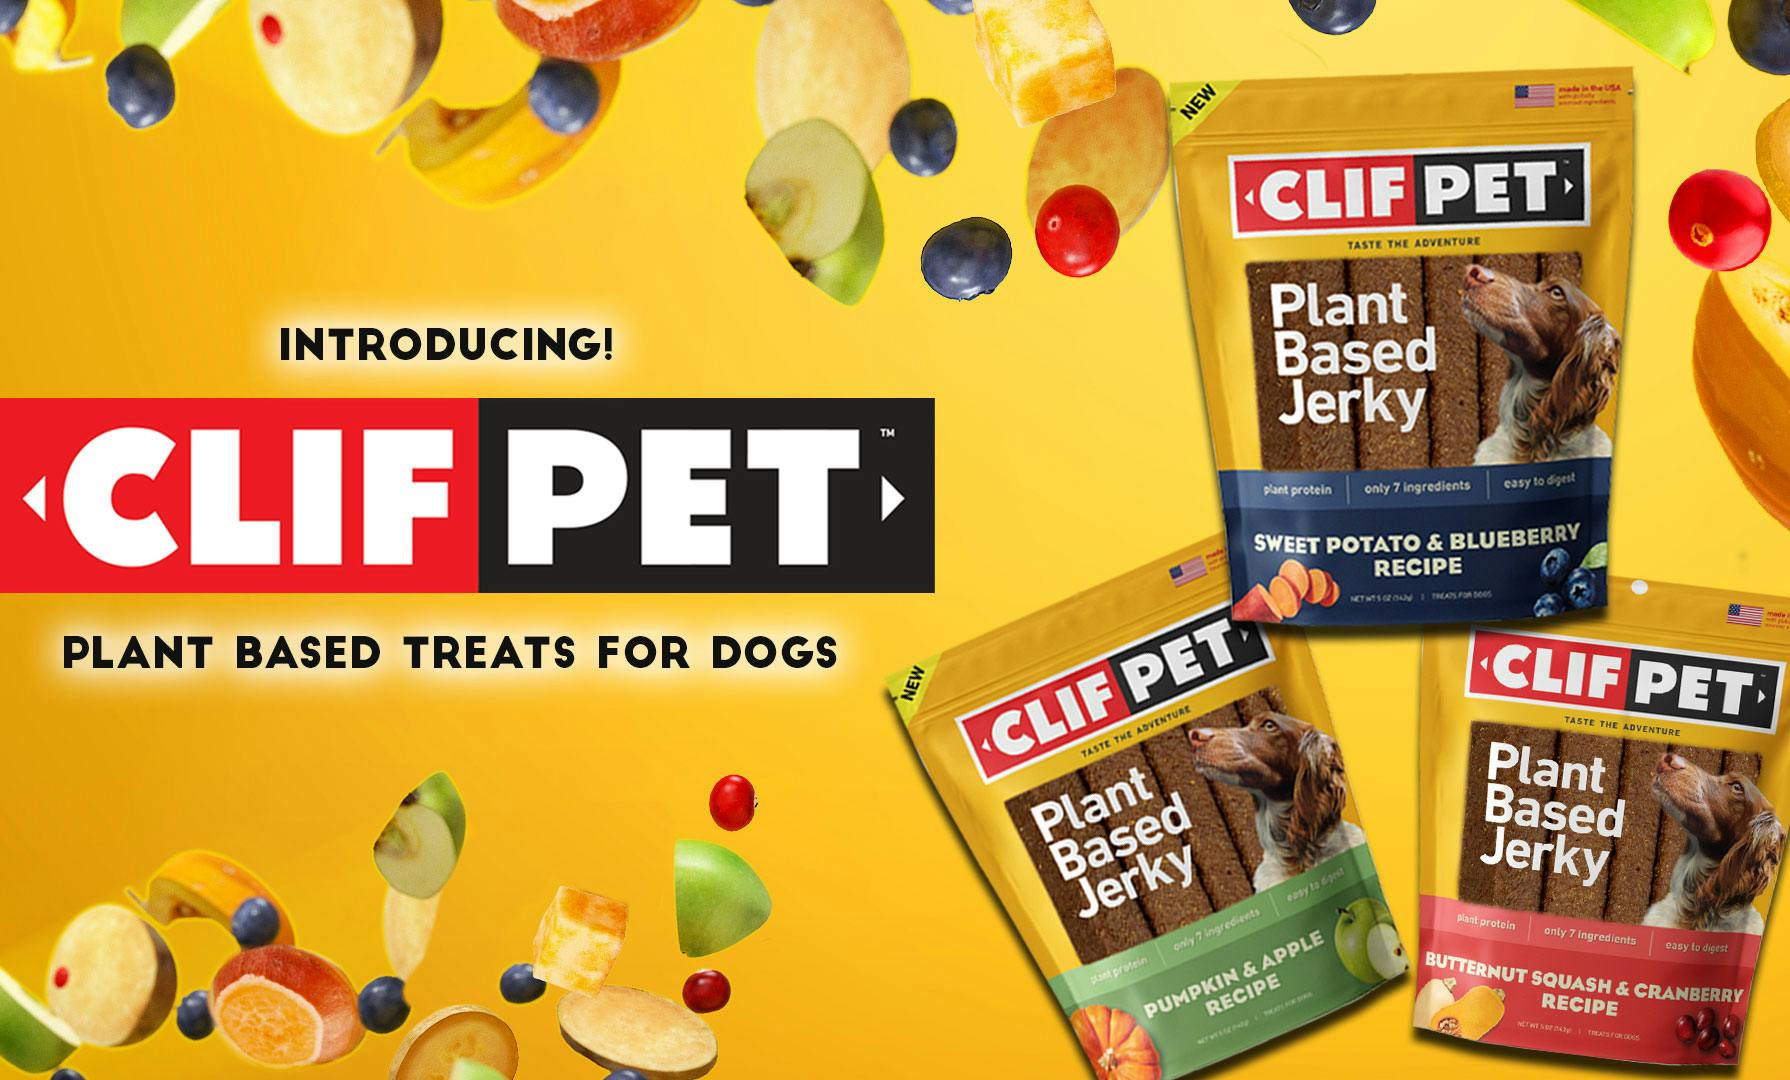 Introducing clif pet plant based treats for dogs